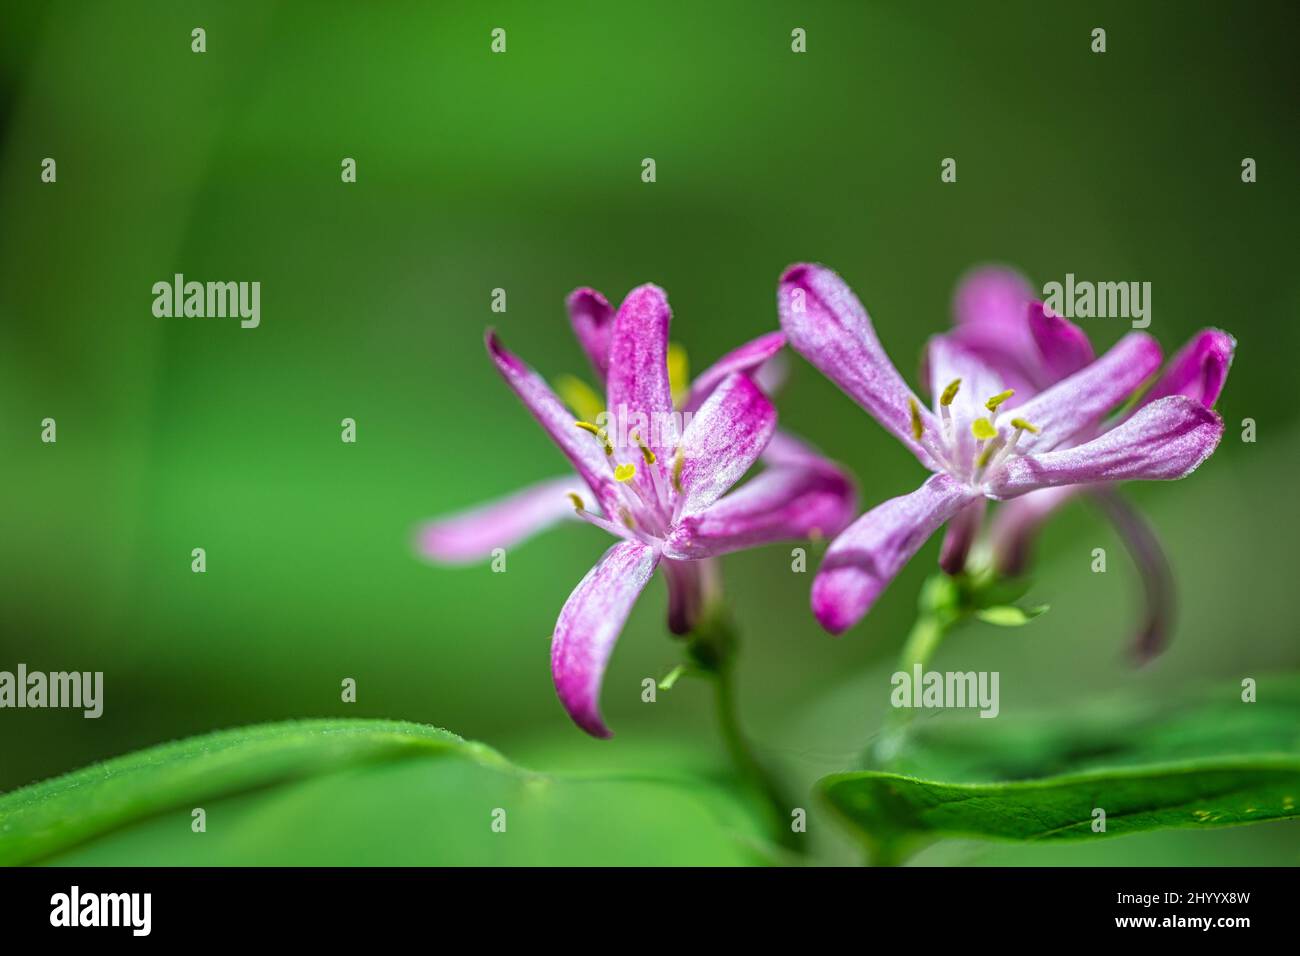 Flowers of Lonicera tatarica, also known as Tatarian honeysuckle, in close-up view on a blurred background. Stock Photo